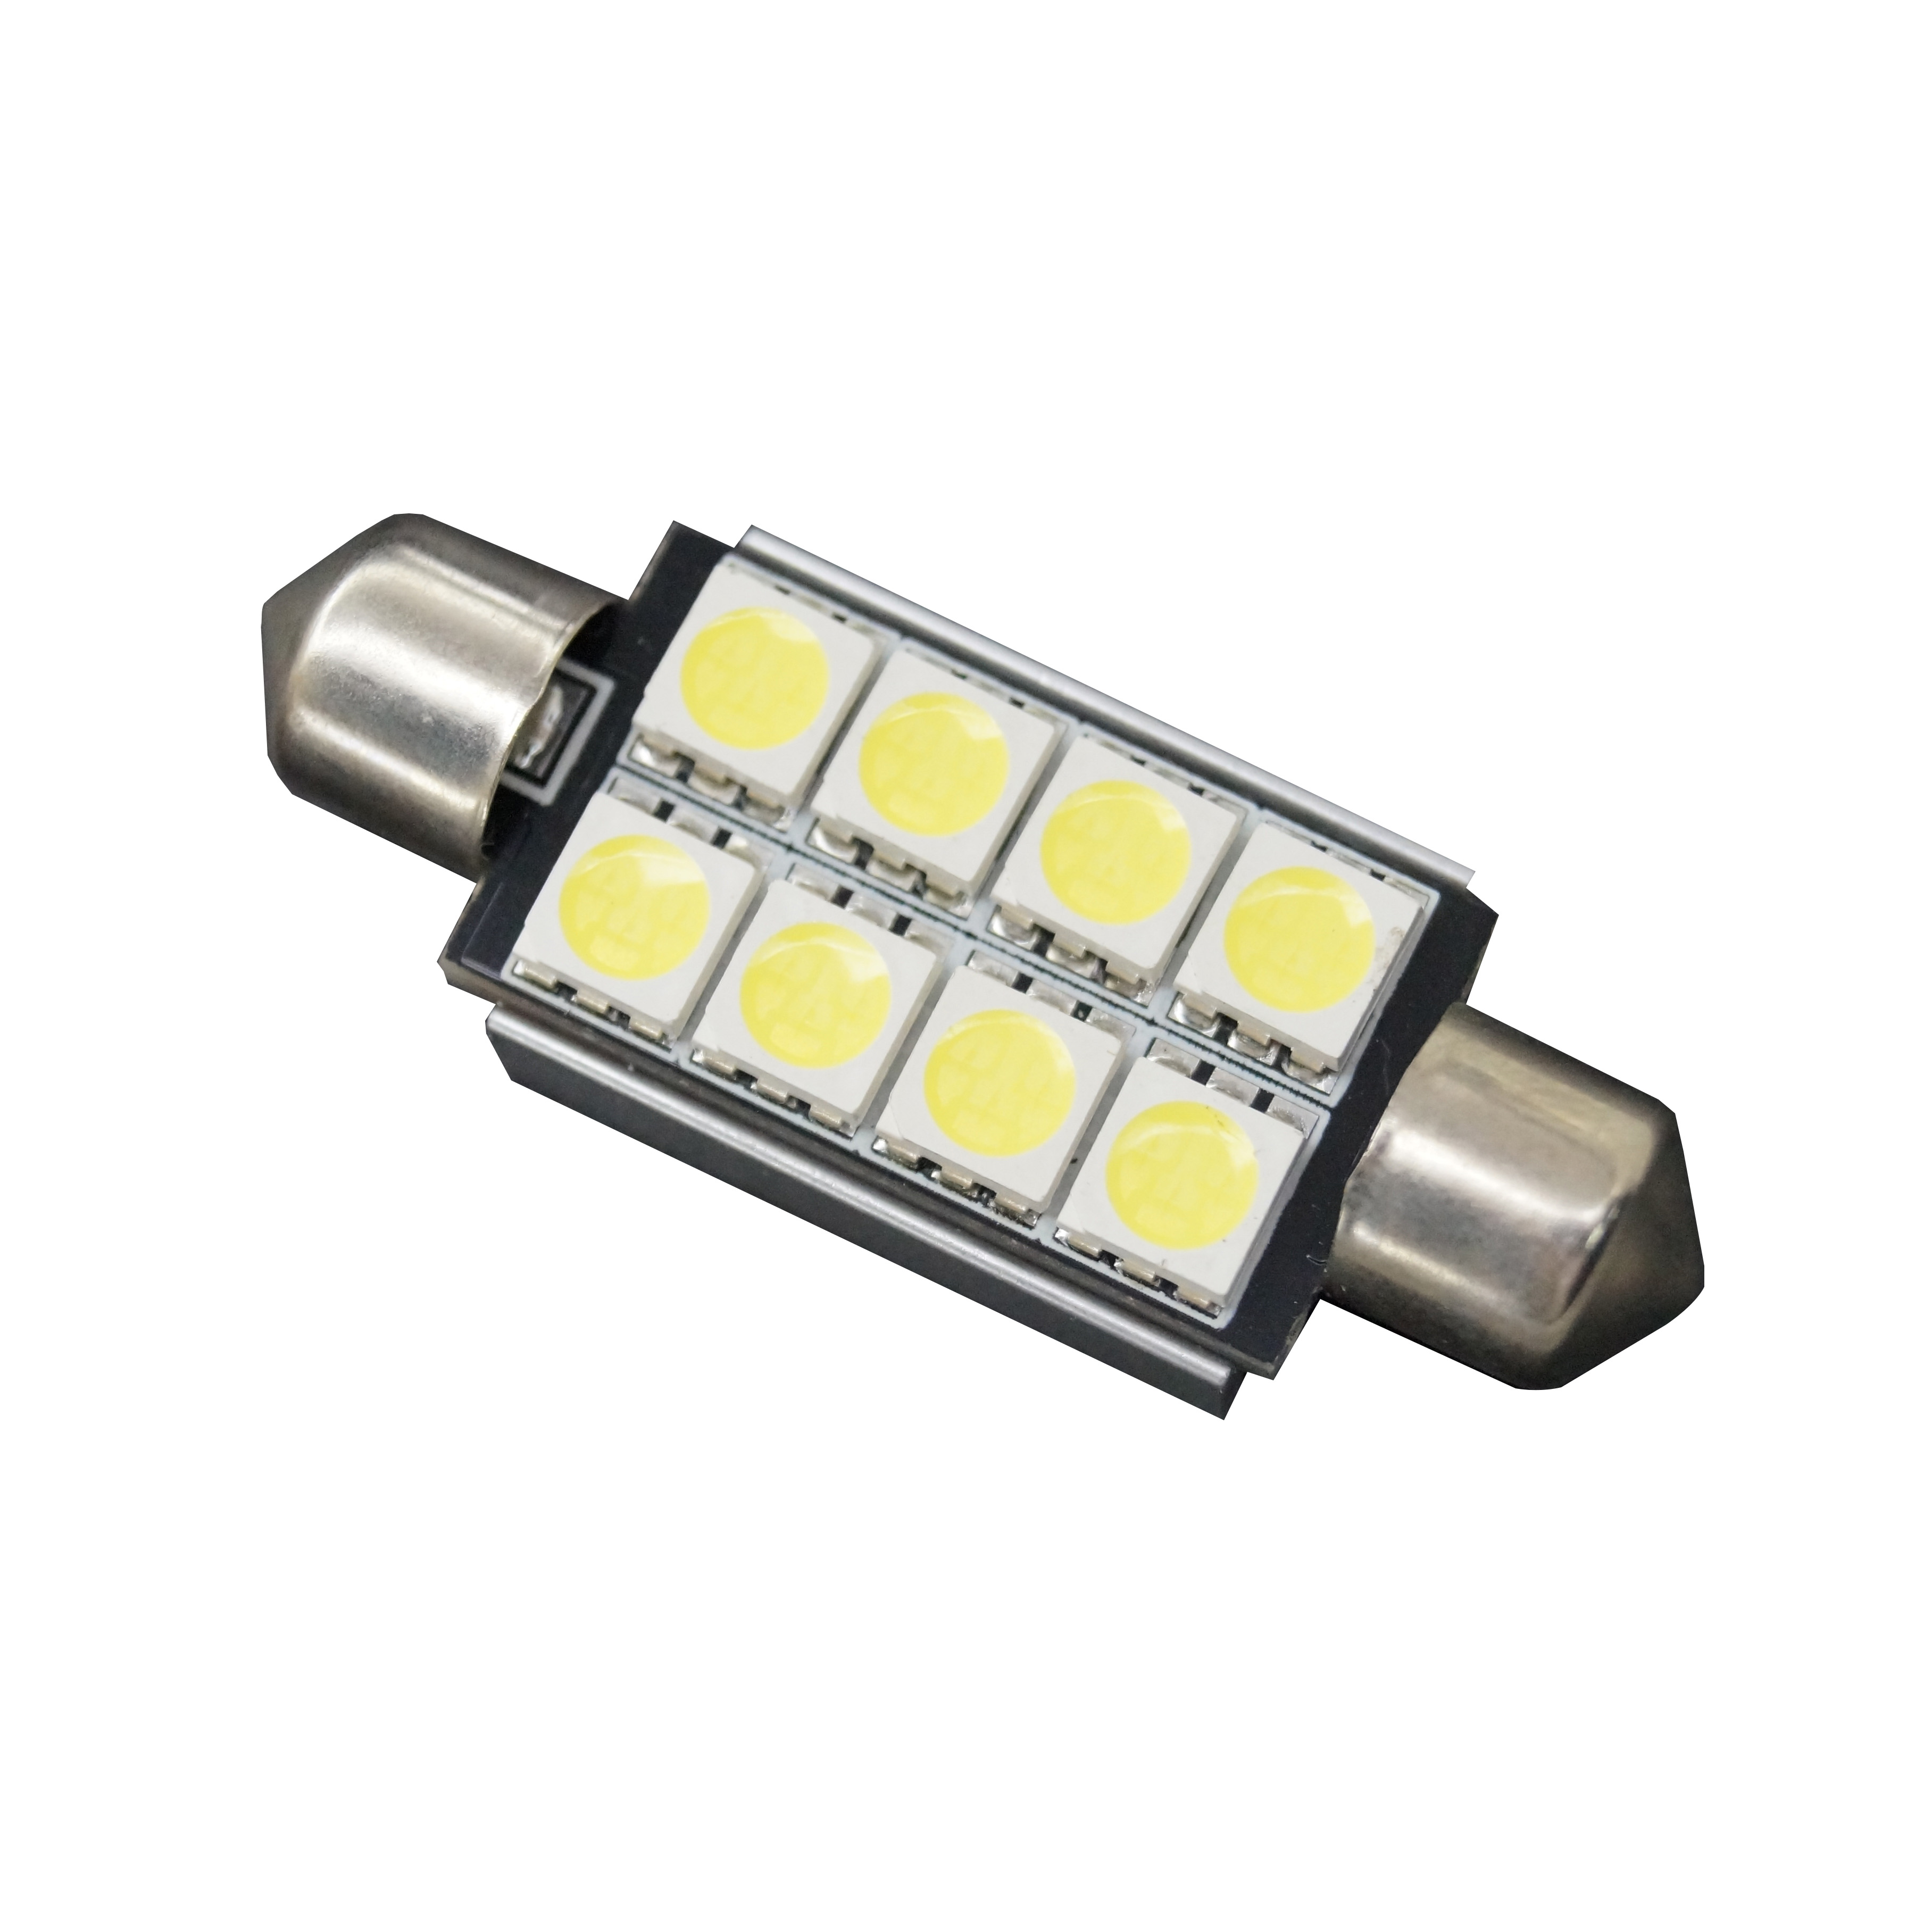 43mm Canbus Interior Auto Light LED Dome Bulbs